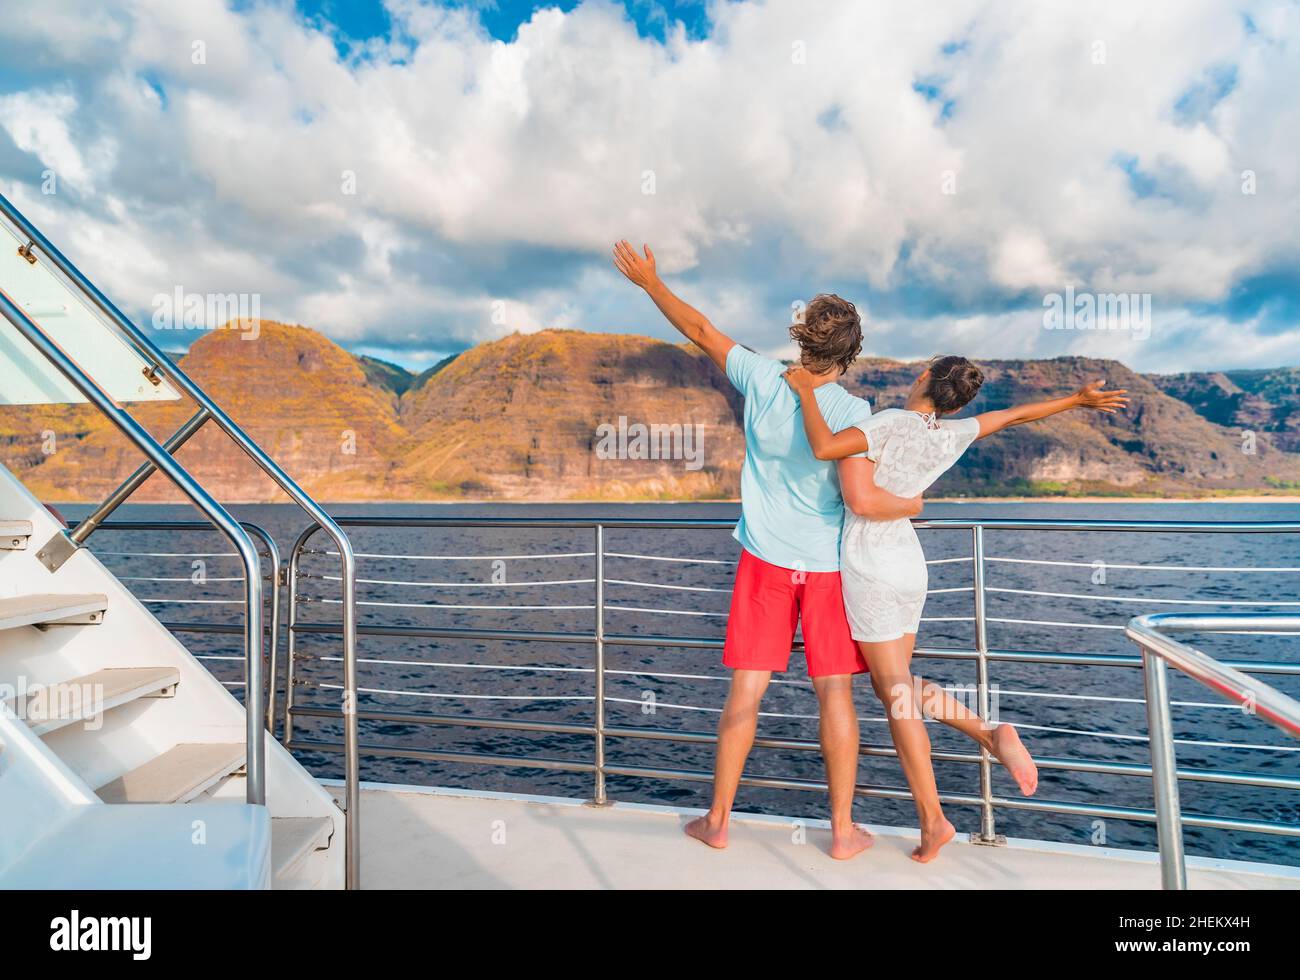 Couple on luxury yacht cruise ship tour at sunset feeling free happy with open arms in fun looking at mountain scenery. Romantic sunset boat ride Stock Photo